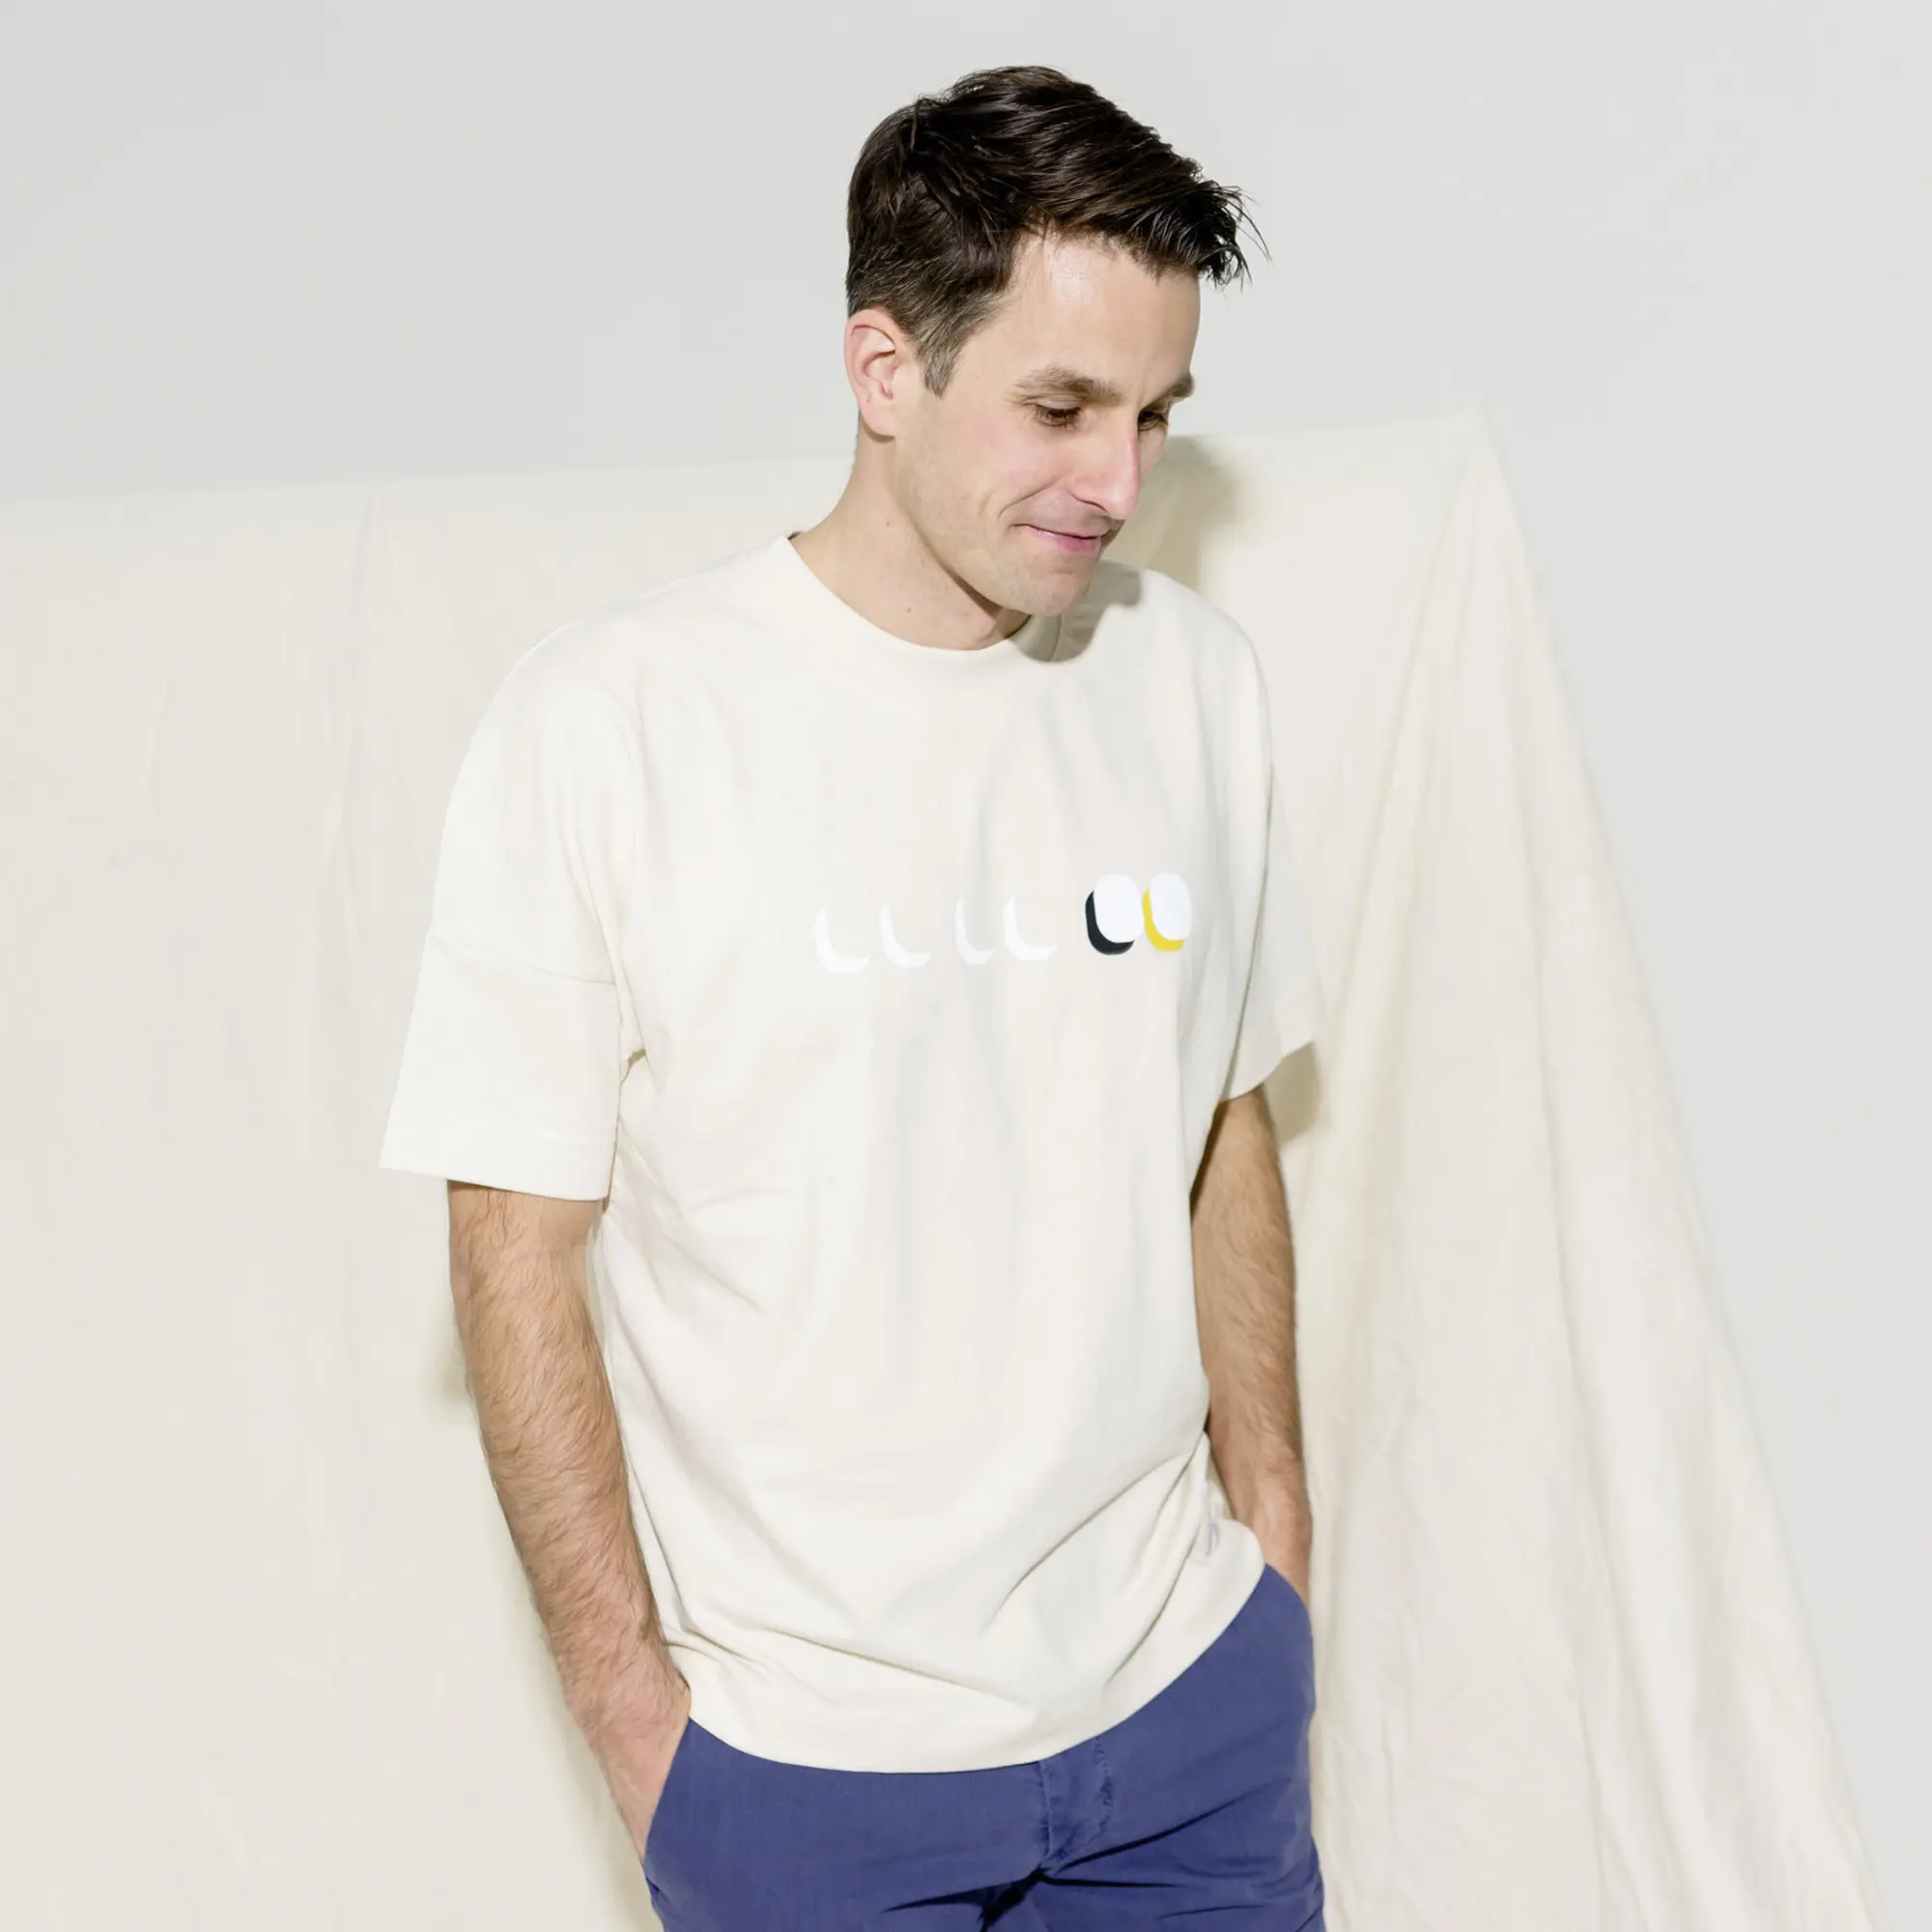 For those who hang loose: Entdecke das Executive Short Sleeve White von Business Nomad